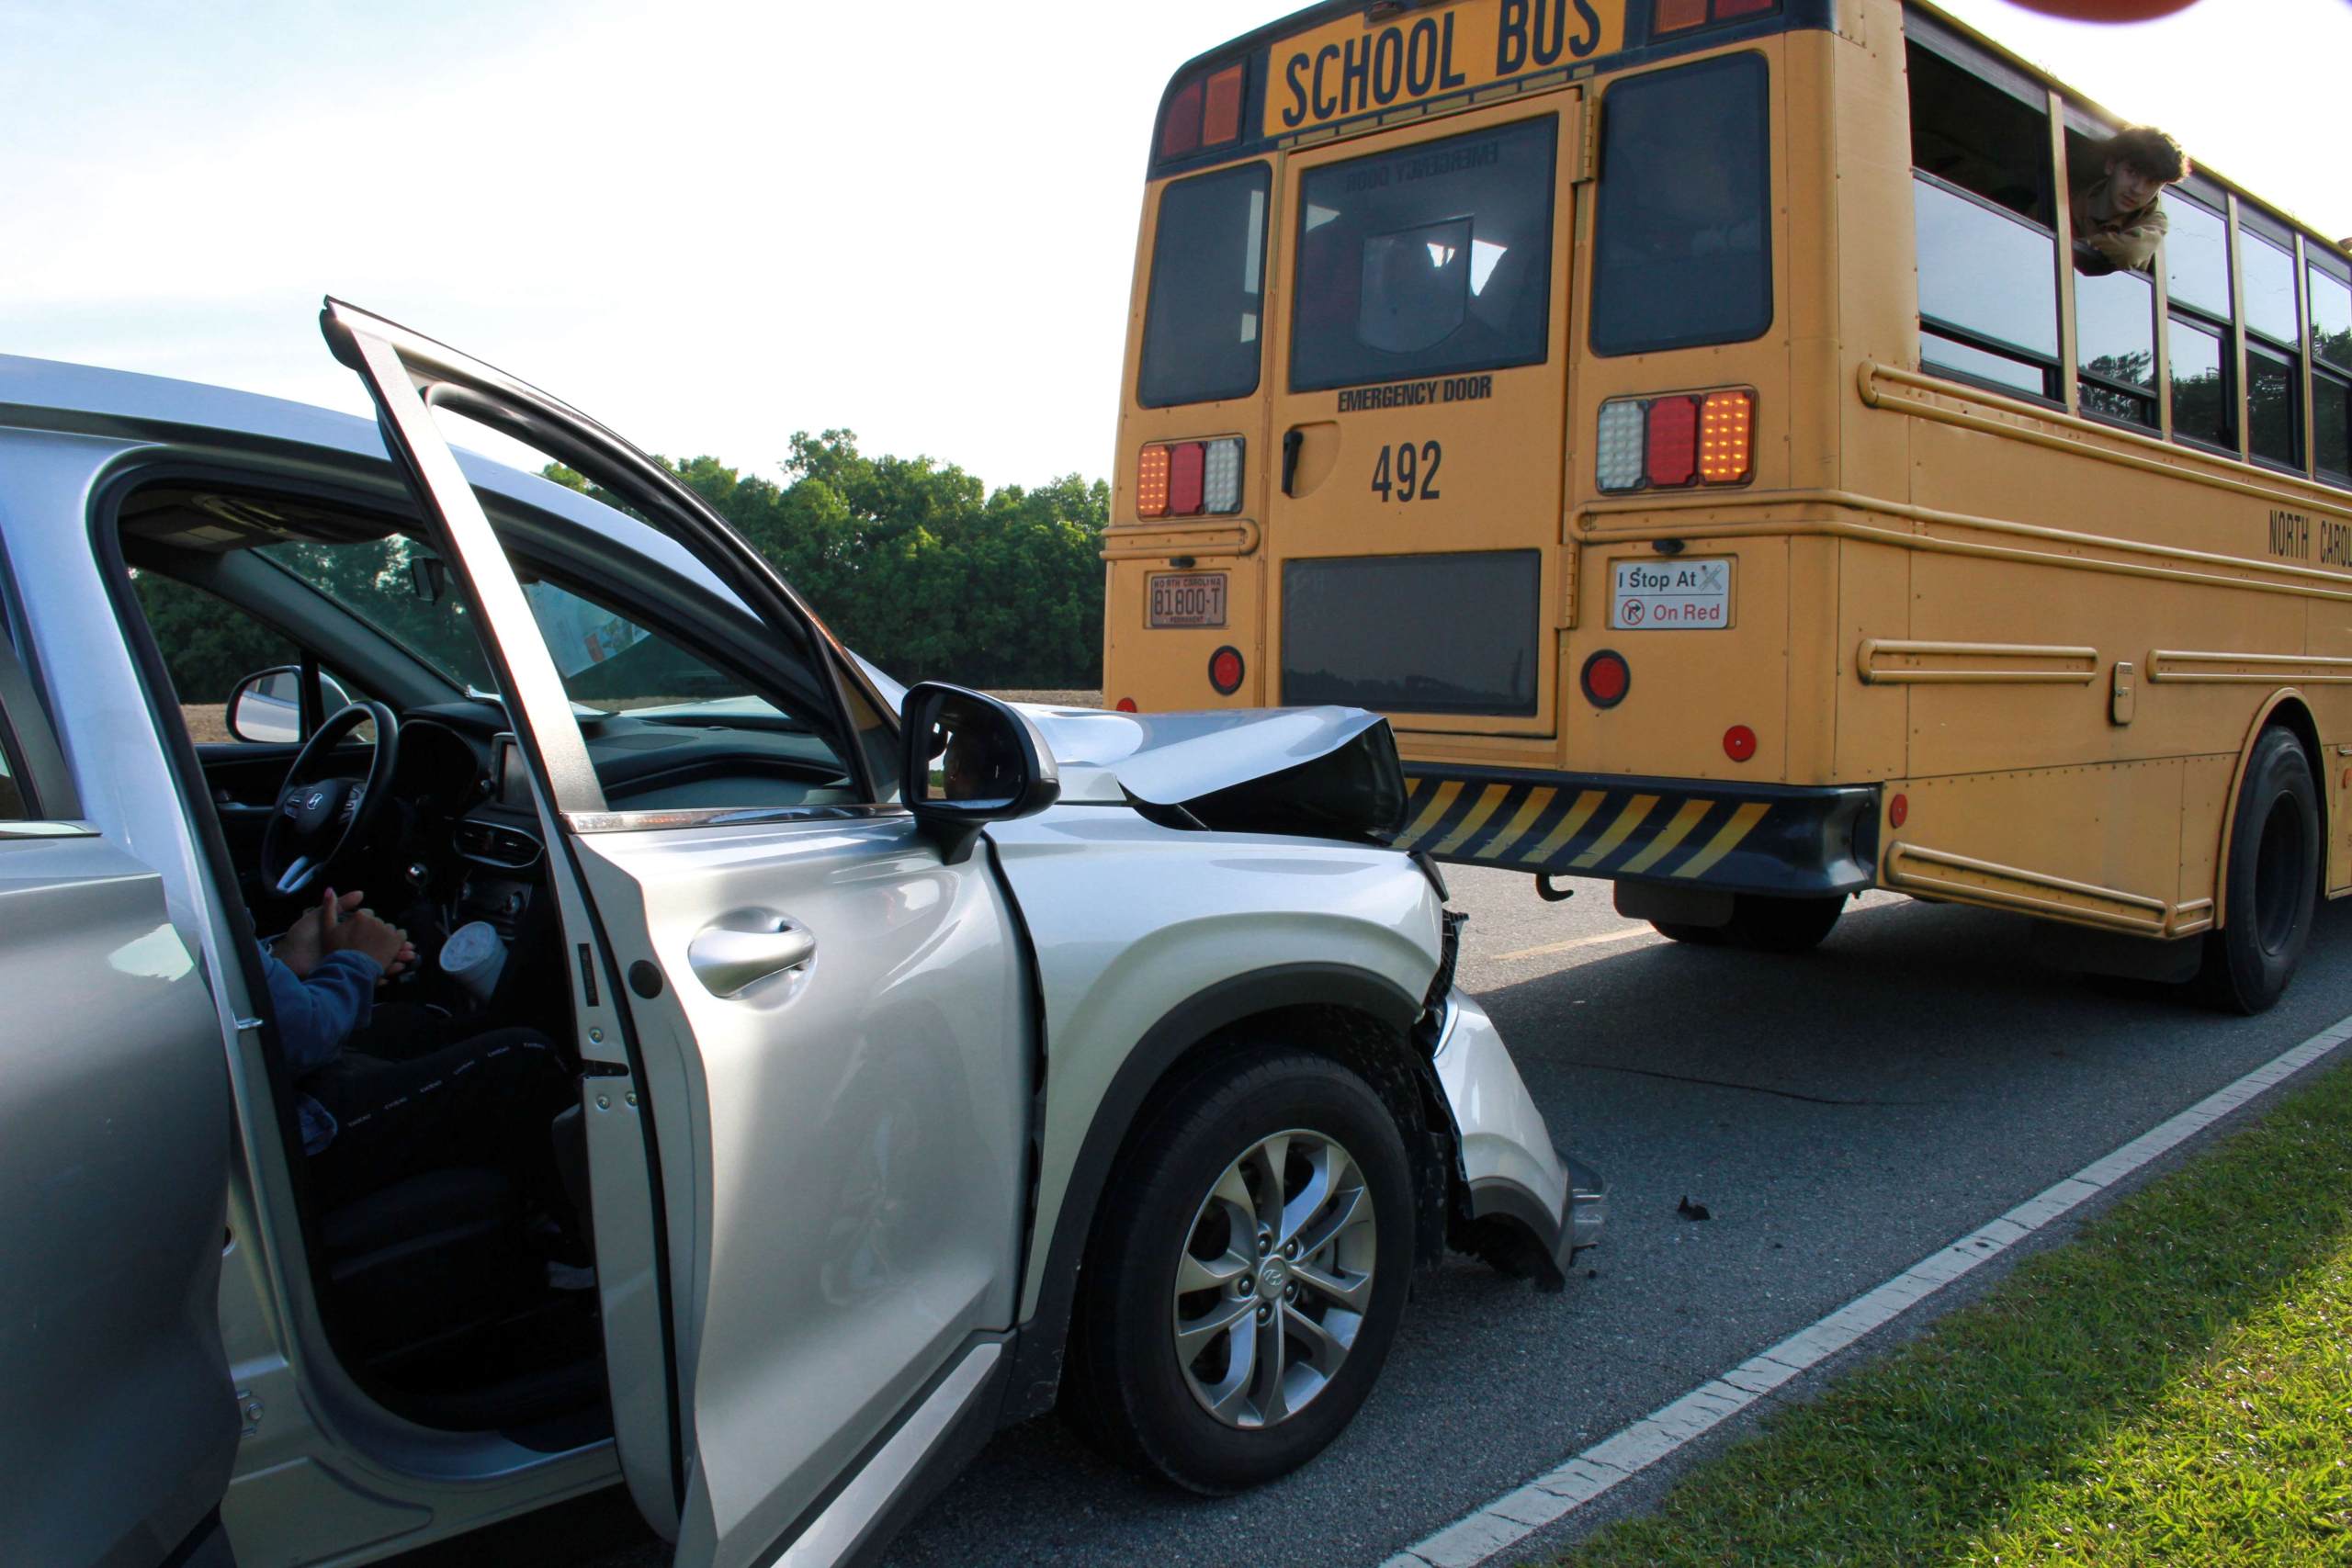 Wayne County School Bus Involved in Thursday Morning Accident